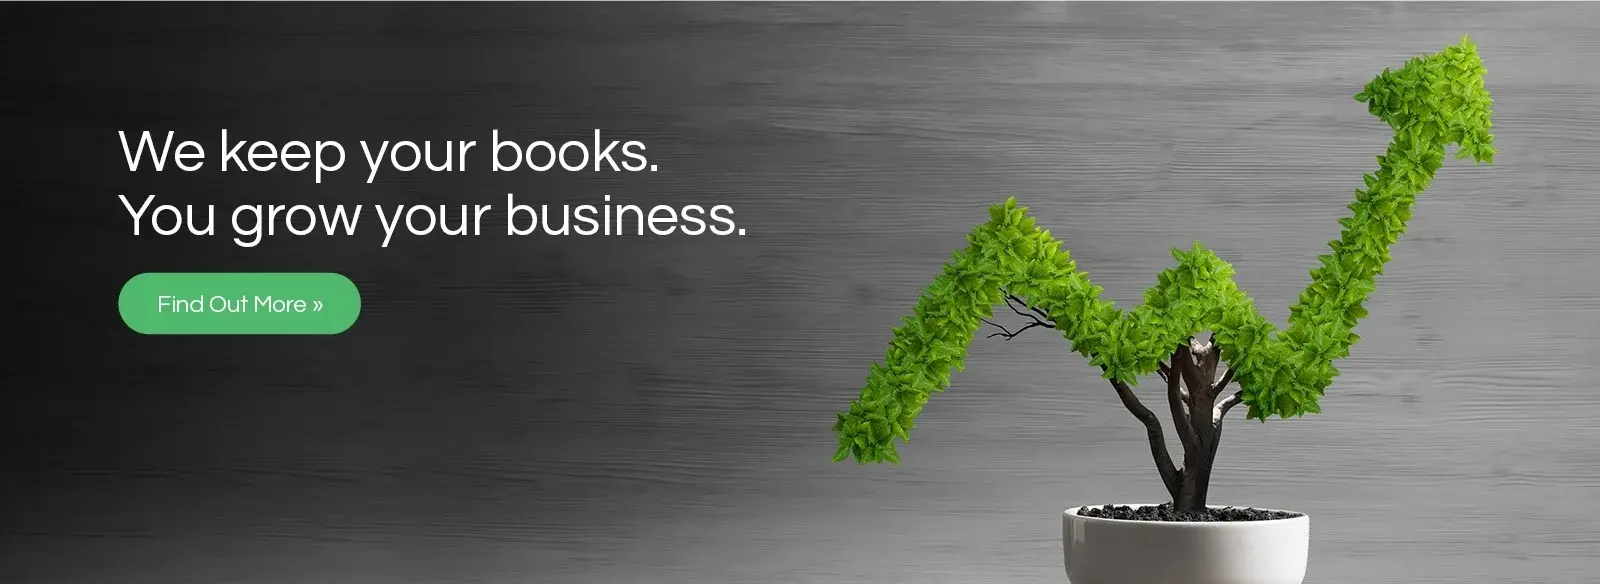 We Keep Your Books. You Grow Your Business